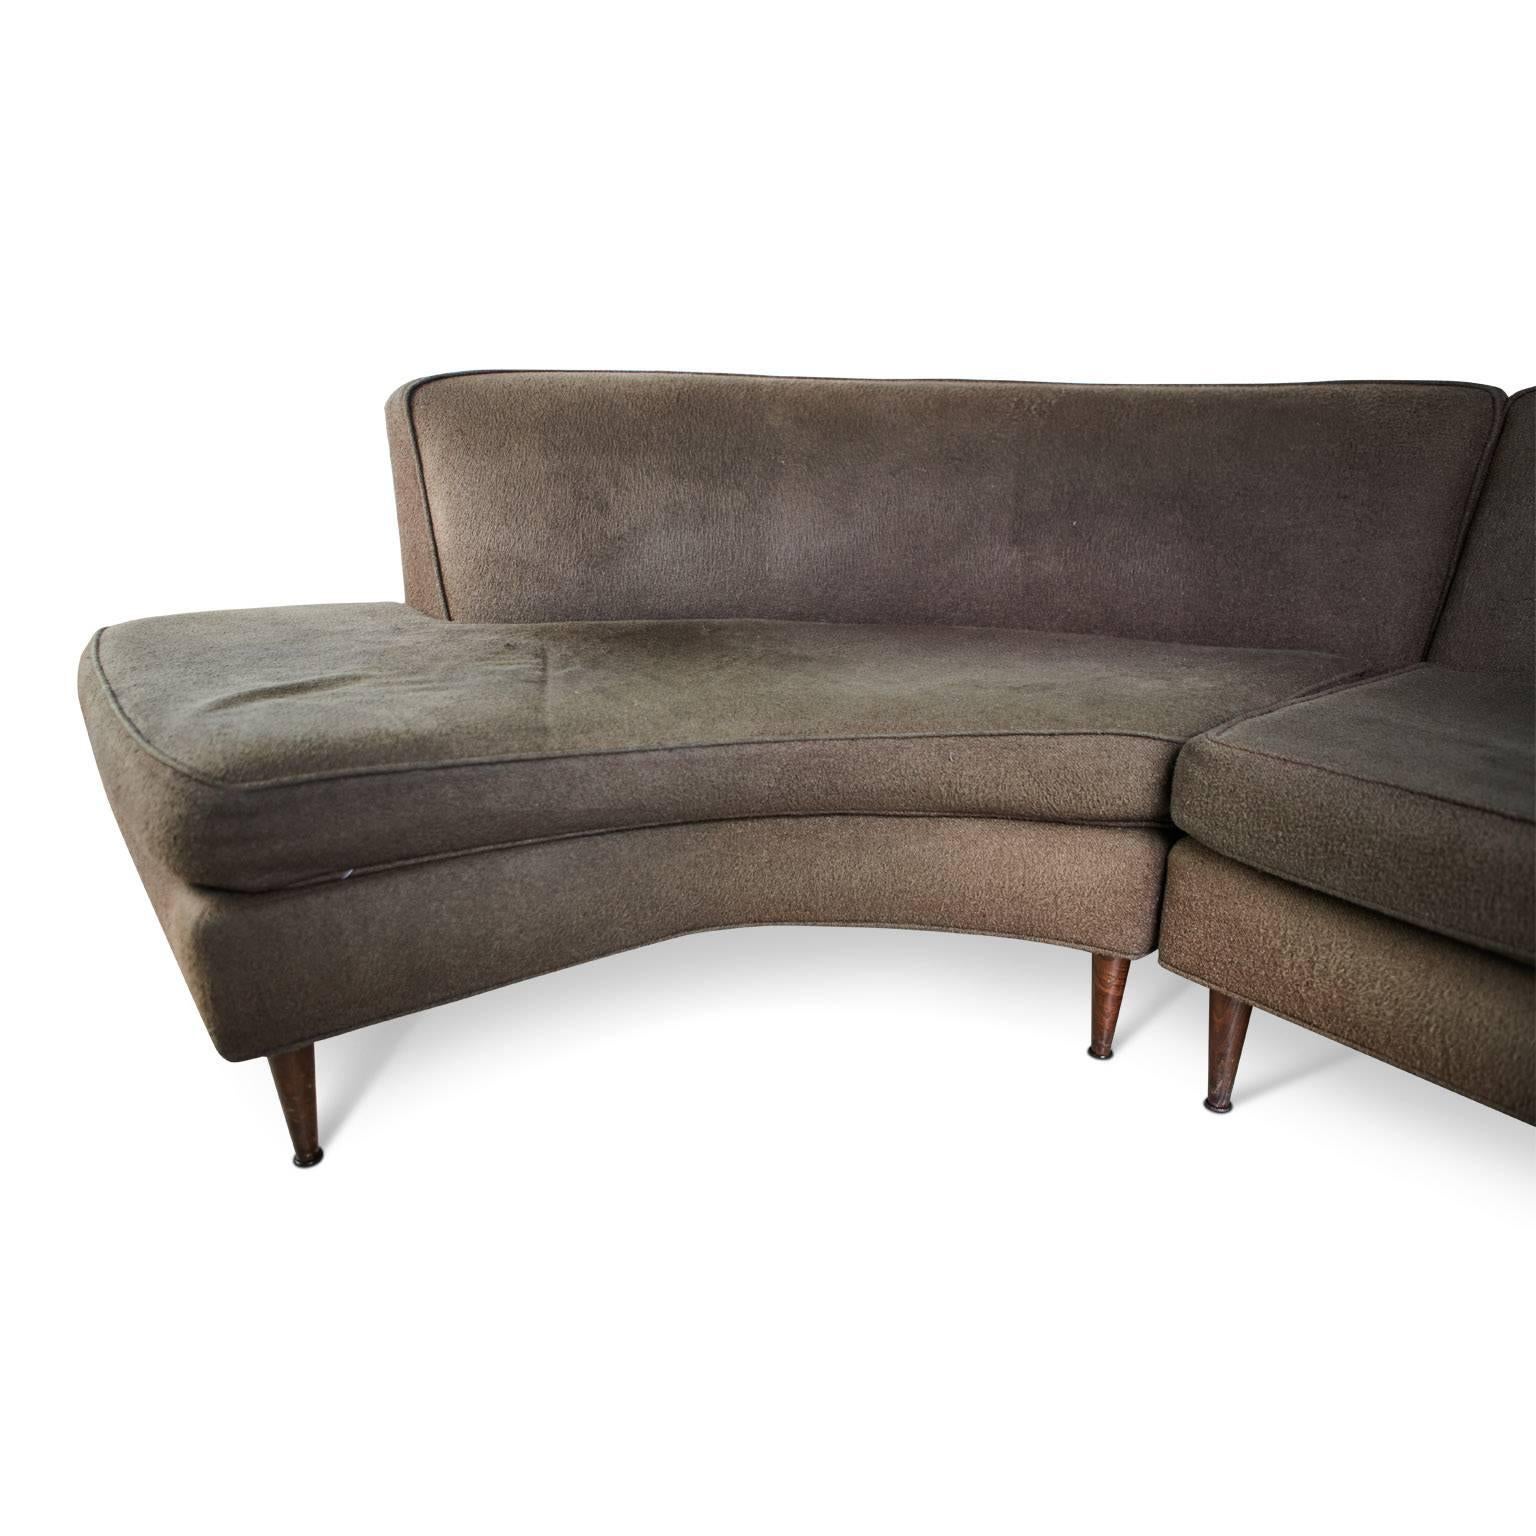 American Curved Sectional Sofa Attributed to Harvey Probber, circa 1960